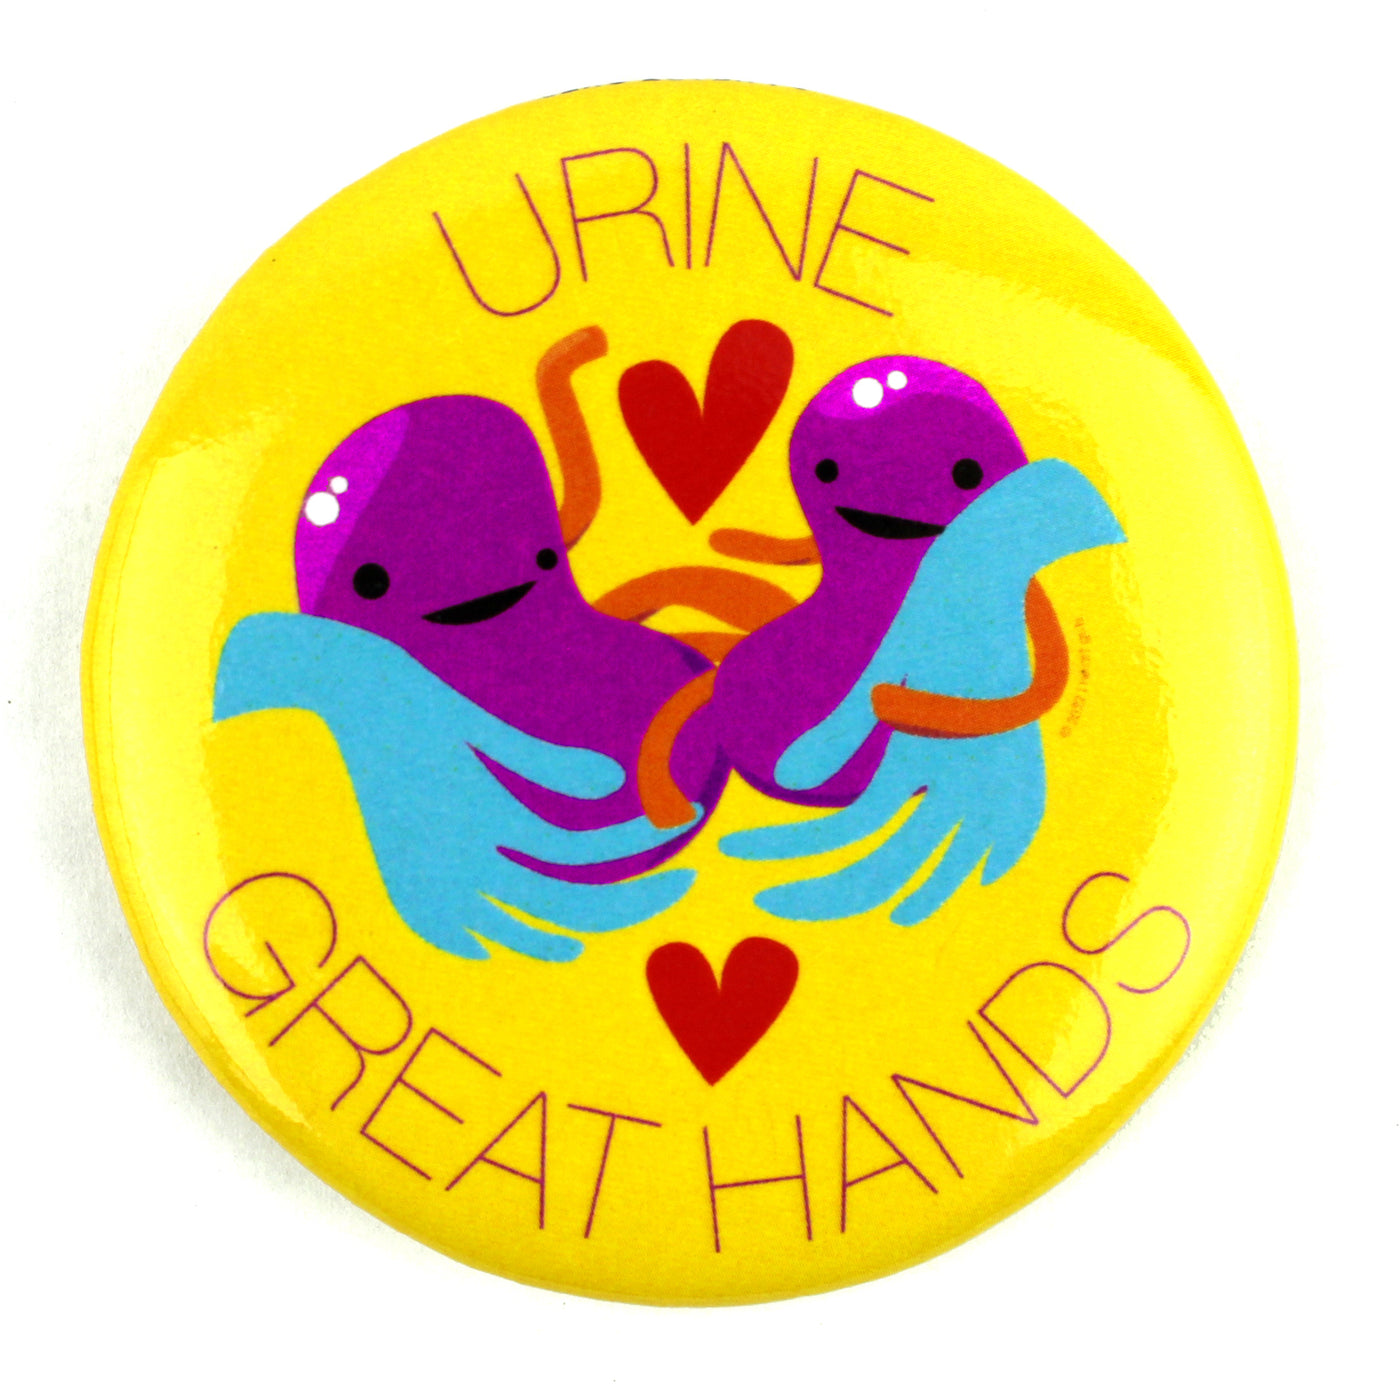 Urine Great Hands Kidneys Magnet | Kidney Donor Transplant Surgery Gift, Cute Organ Donor Awareness - I Heart Guts